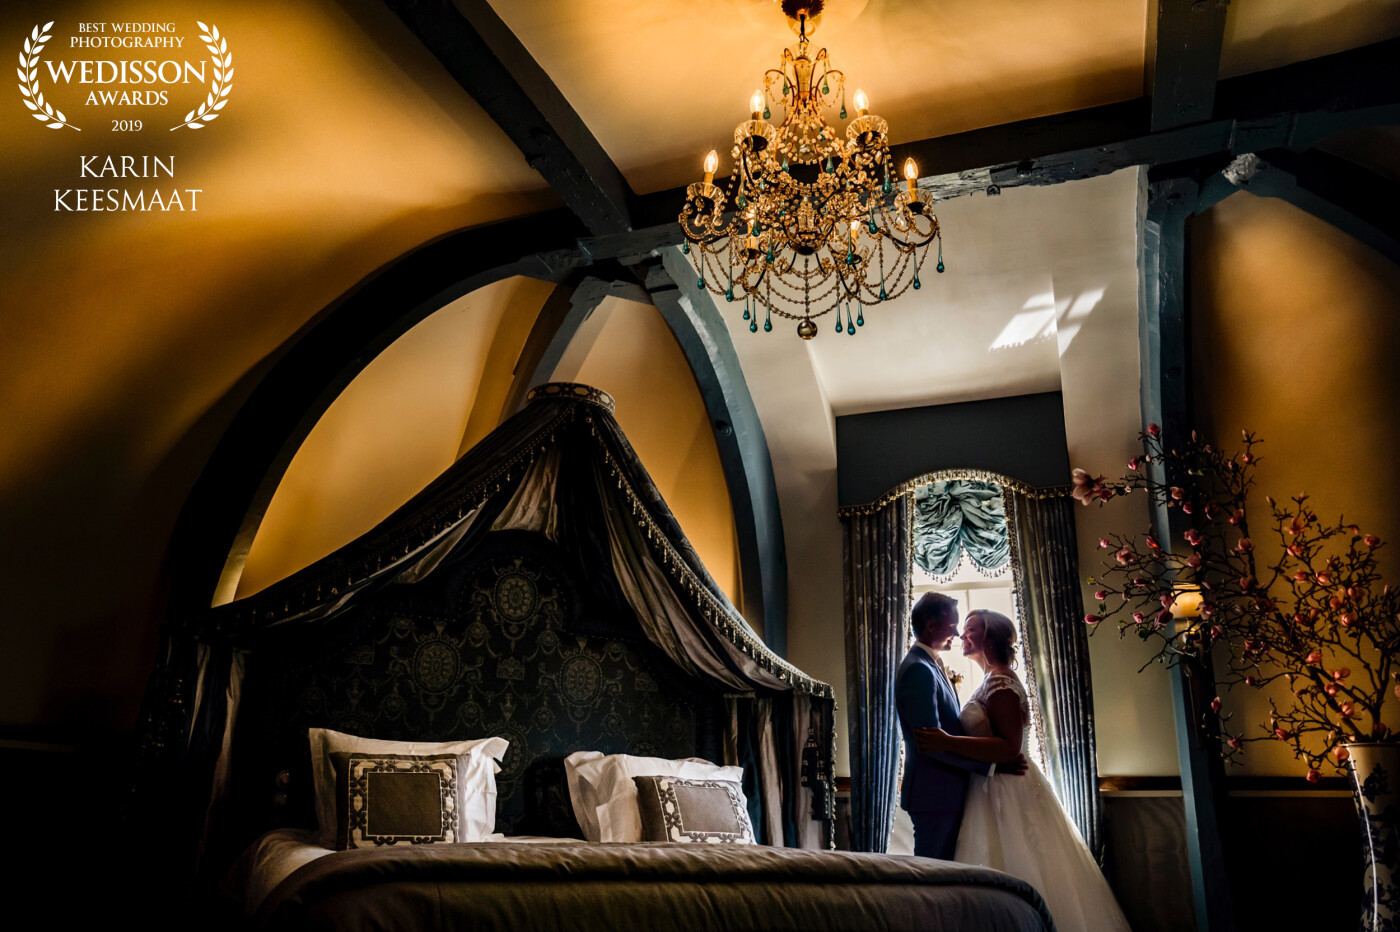 This lovely couple wed in a gorgeous environment of a Dutch castle. They spend the night in this nice bridal room where we could take this nice picture. 